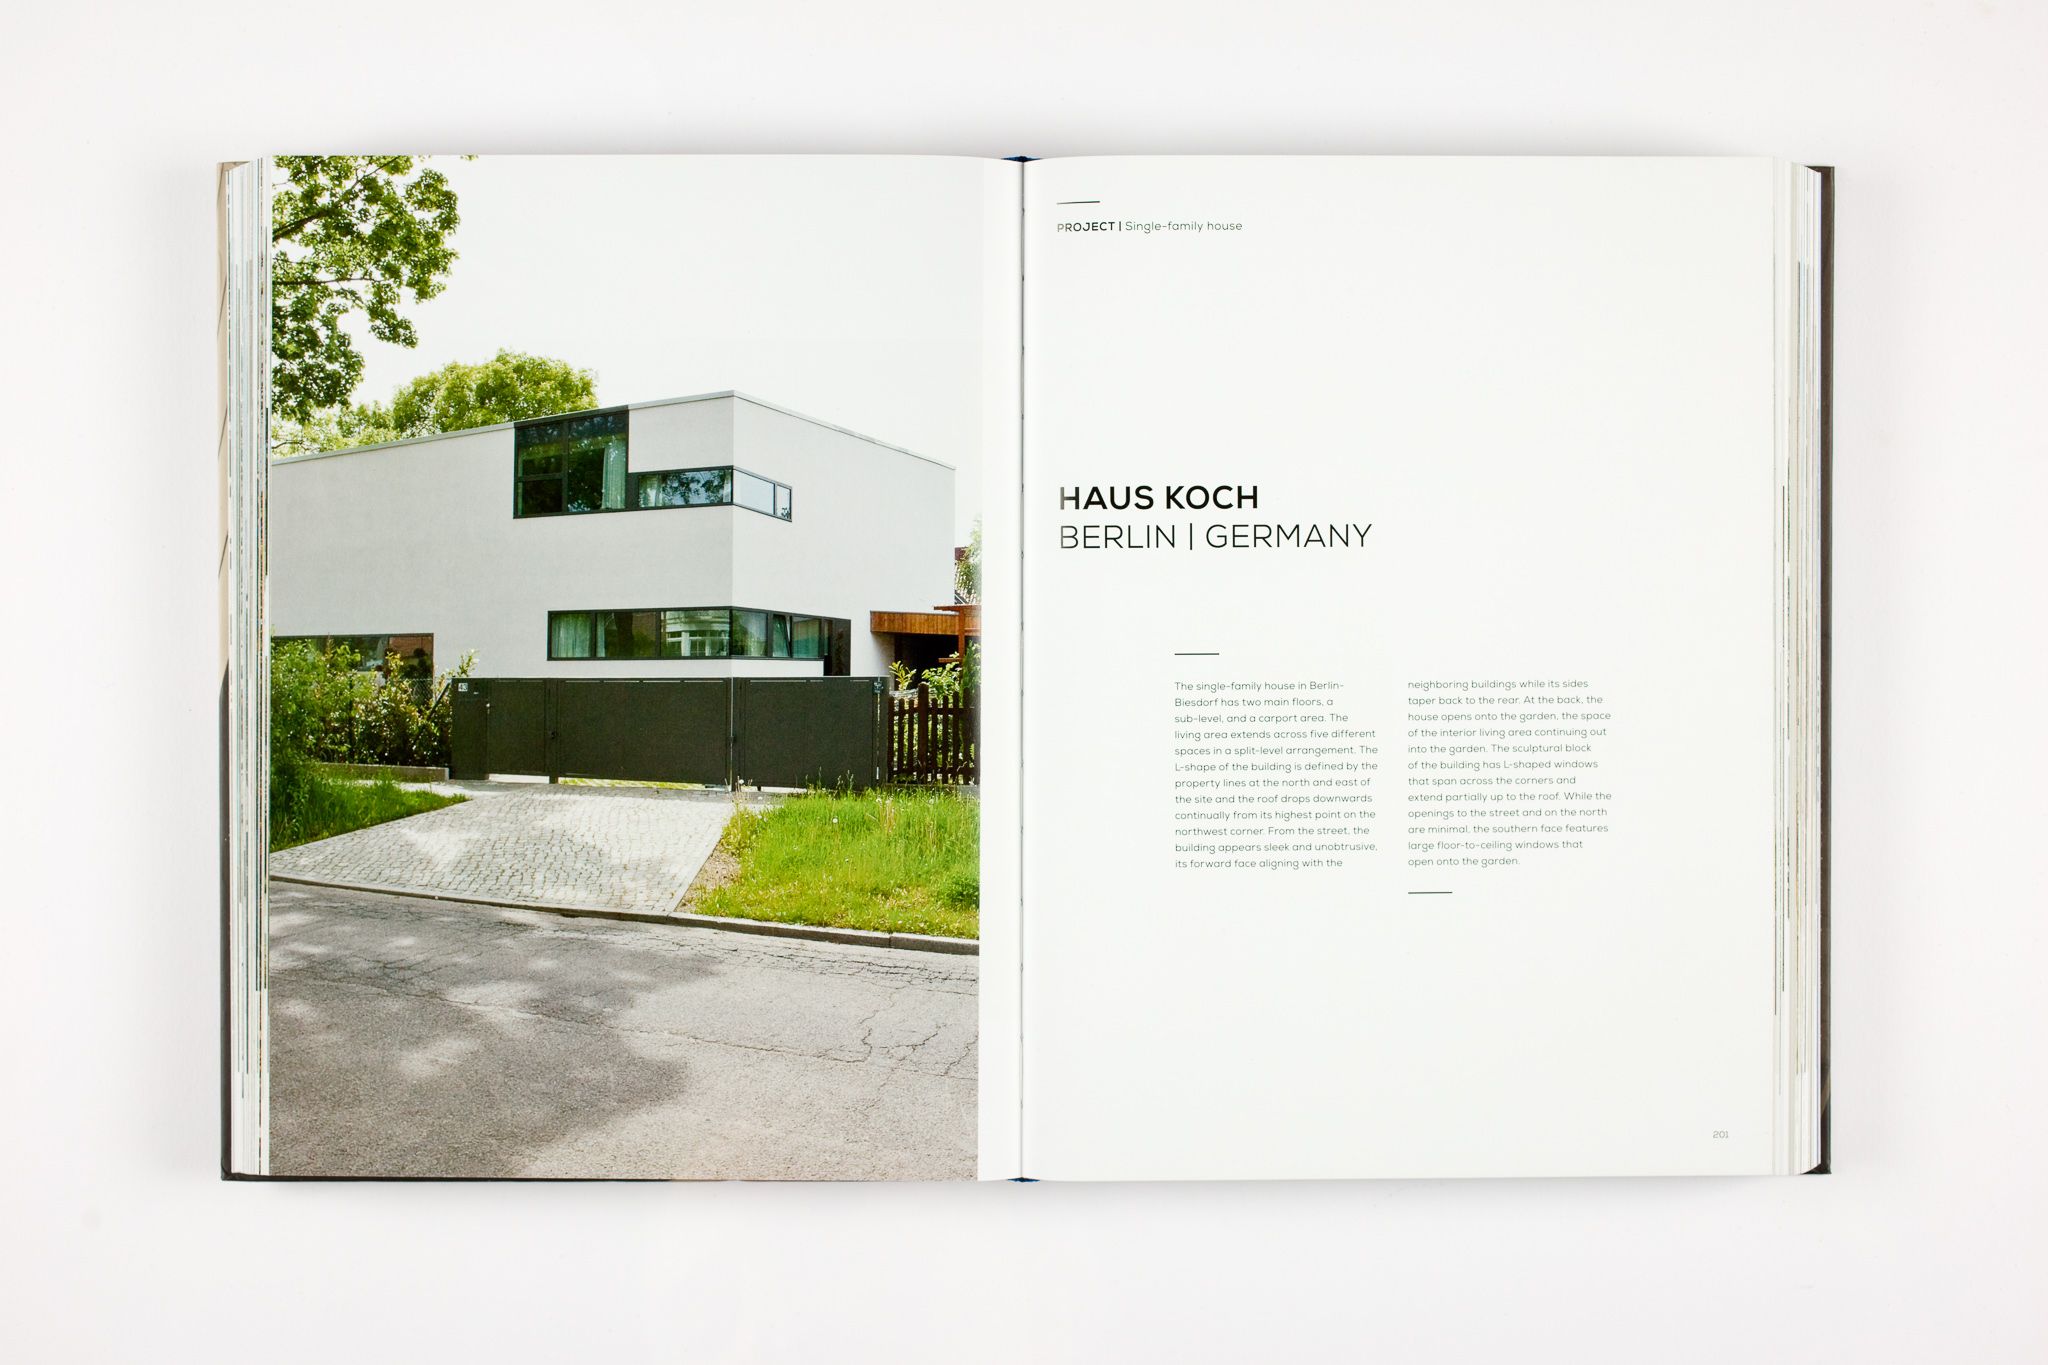 Renowned publishing house Birkhaeuser de Gruyter presents the monograph GRAFT Home. Story. that shows a comprehensive overview of the firm’s work in the field of housing and hospitality.